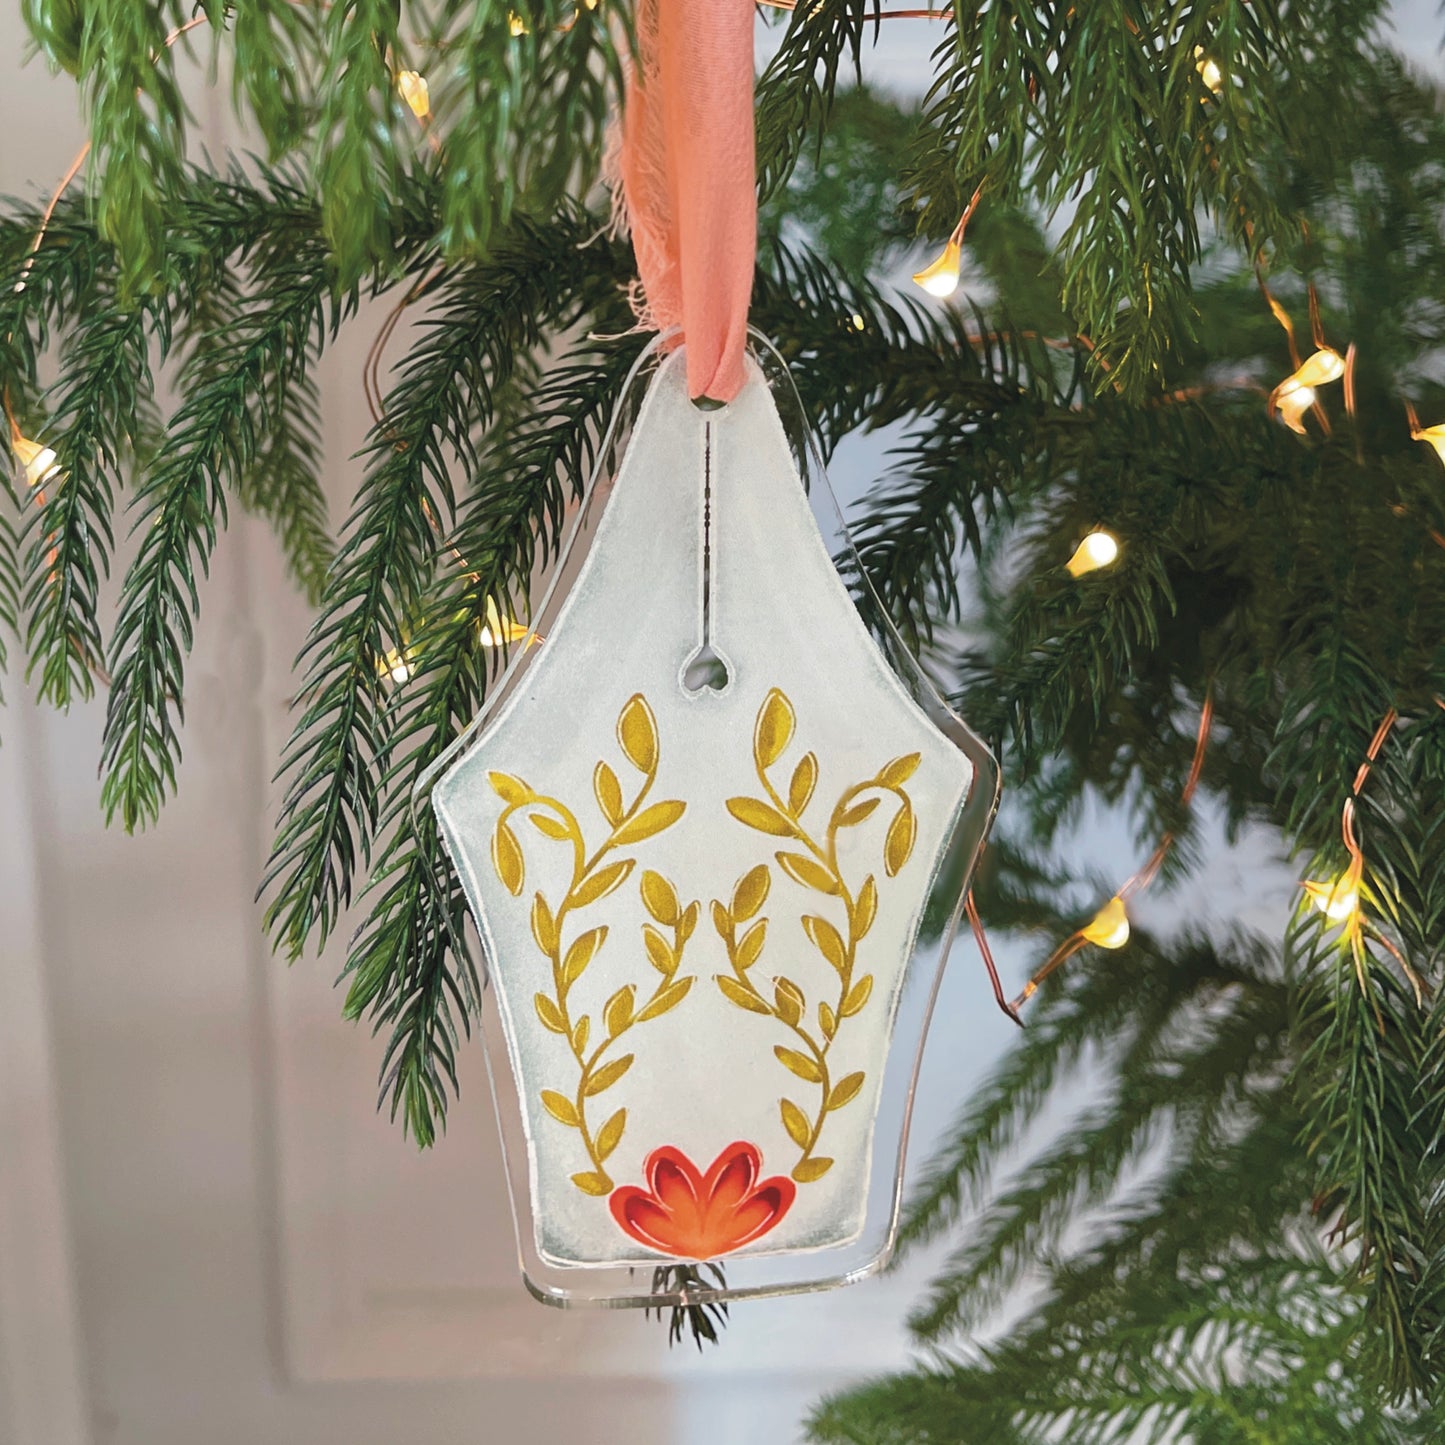 Acrylic fountain pen nib ornament featuring garden flower design hanging on a Christmas tree with lights.